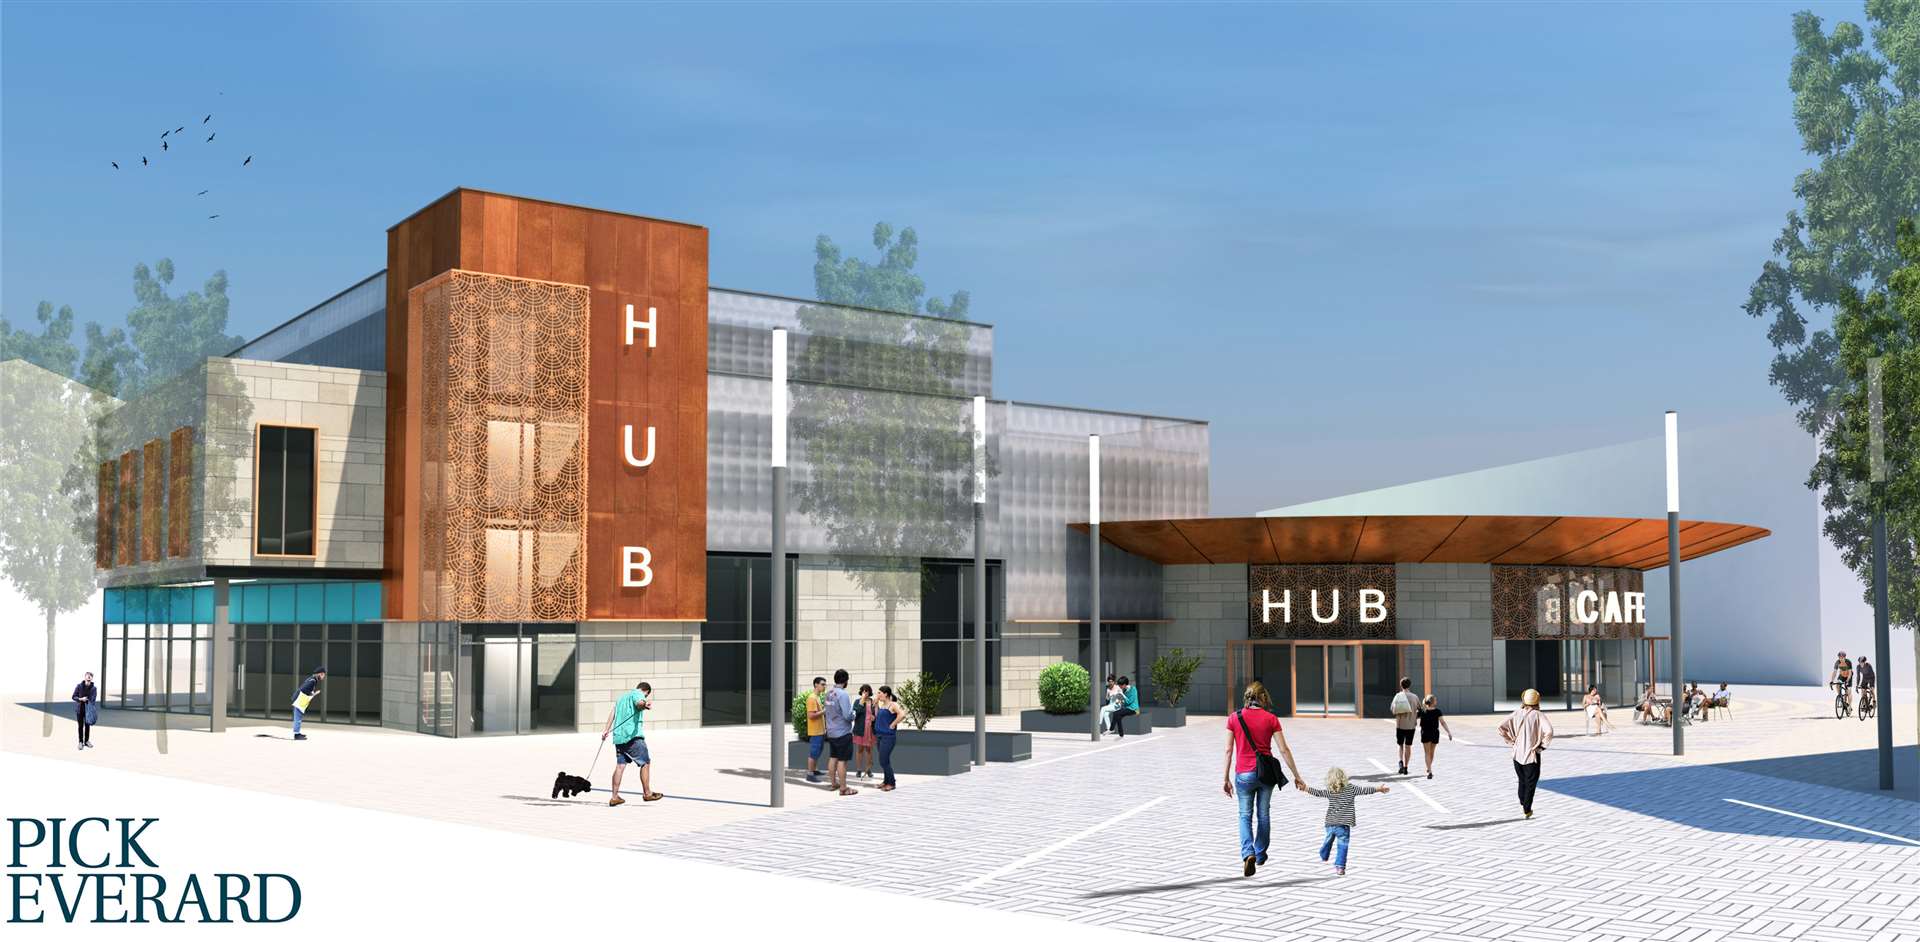 The planned Southborough Hub